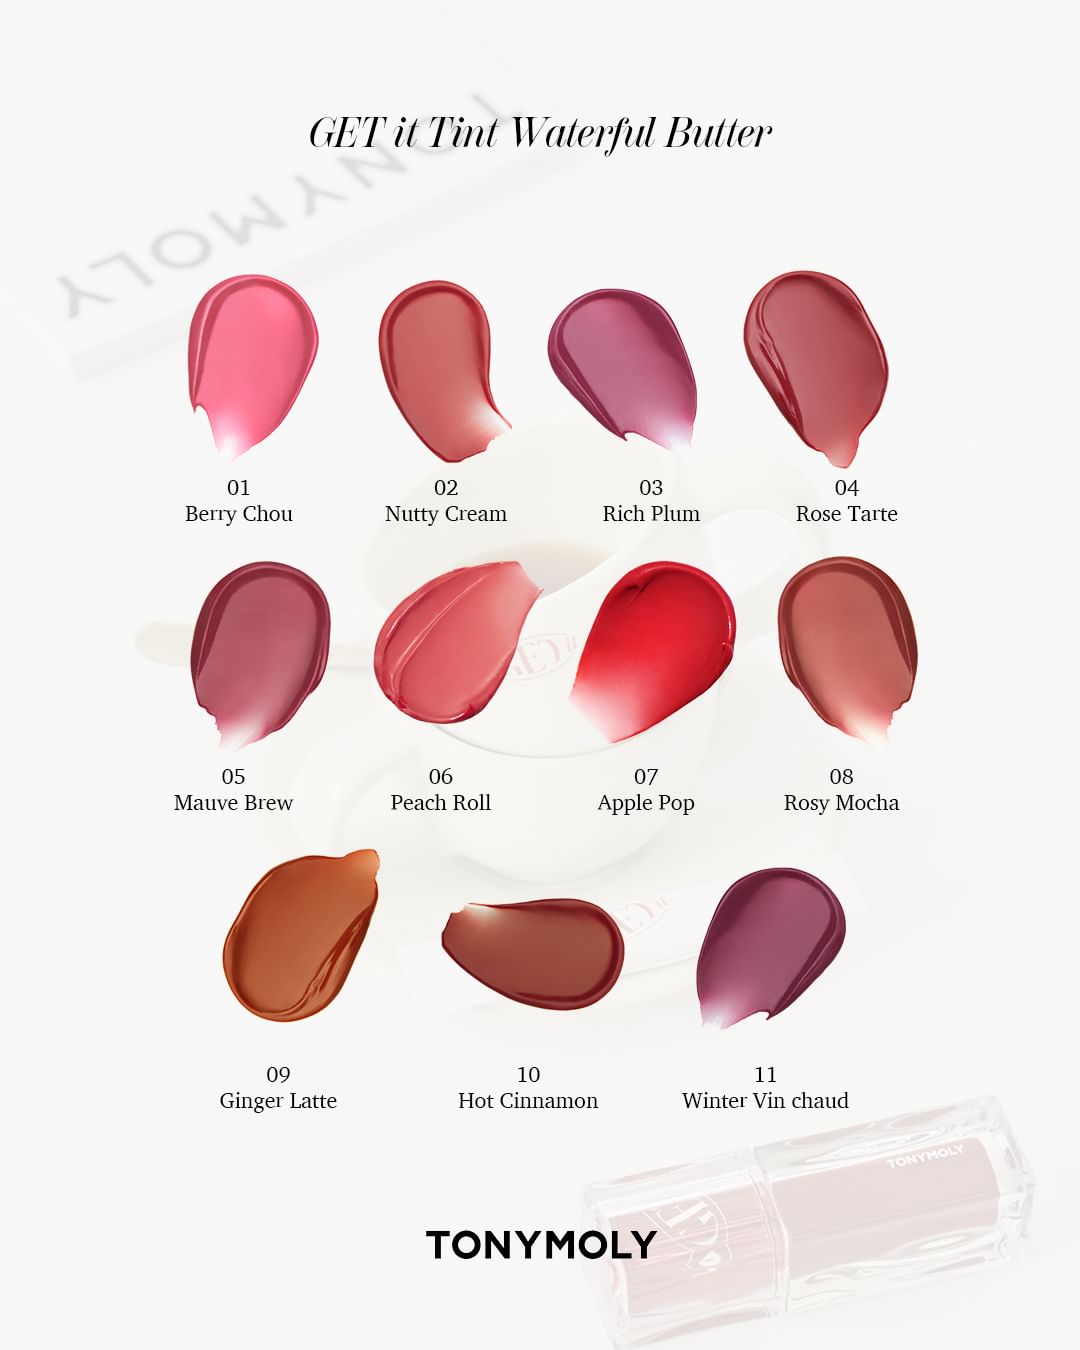 Get It Tint Waterfull Butter (13 shades)